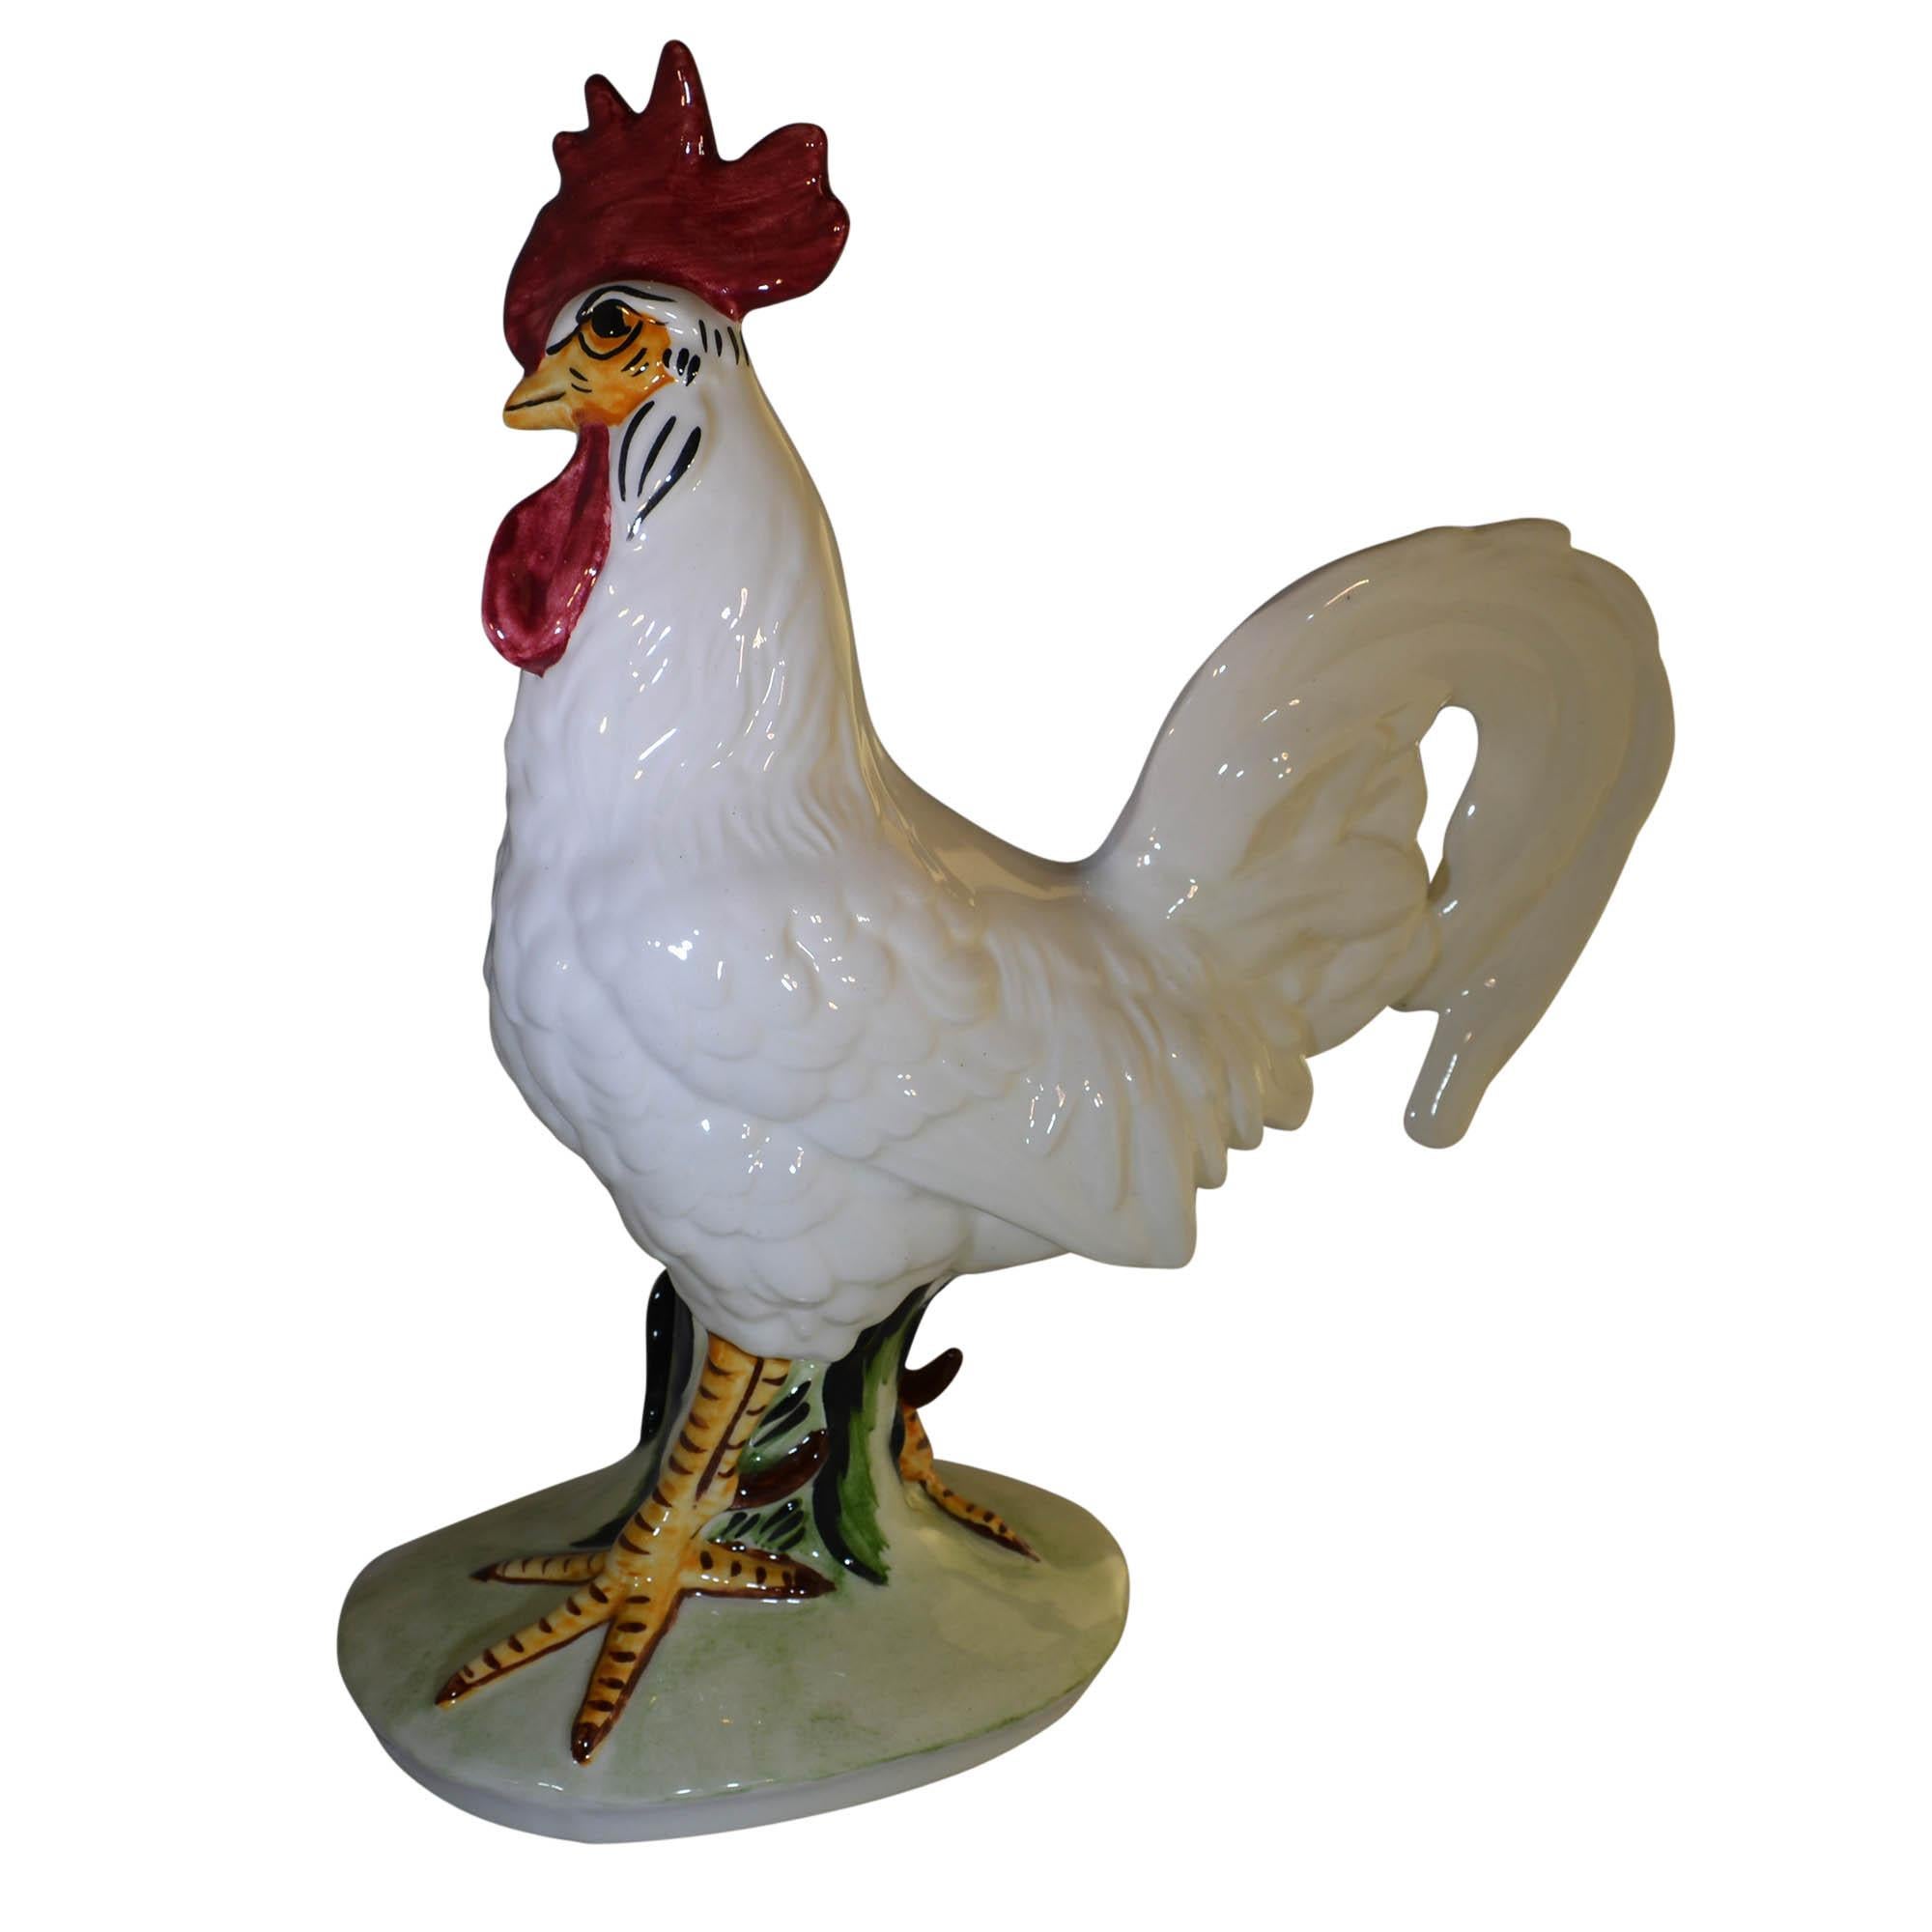 American Vintage Pennsbury Pottery Rooster Figurine White Light Green Base